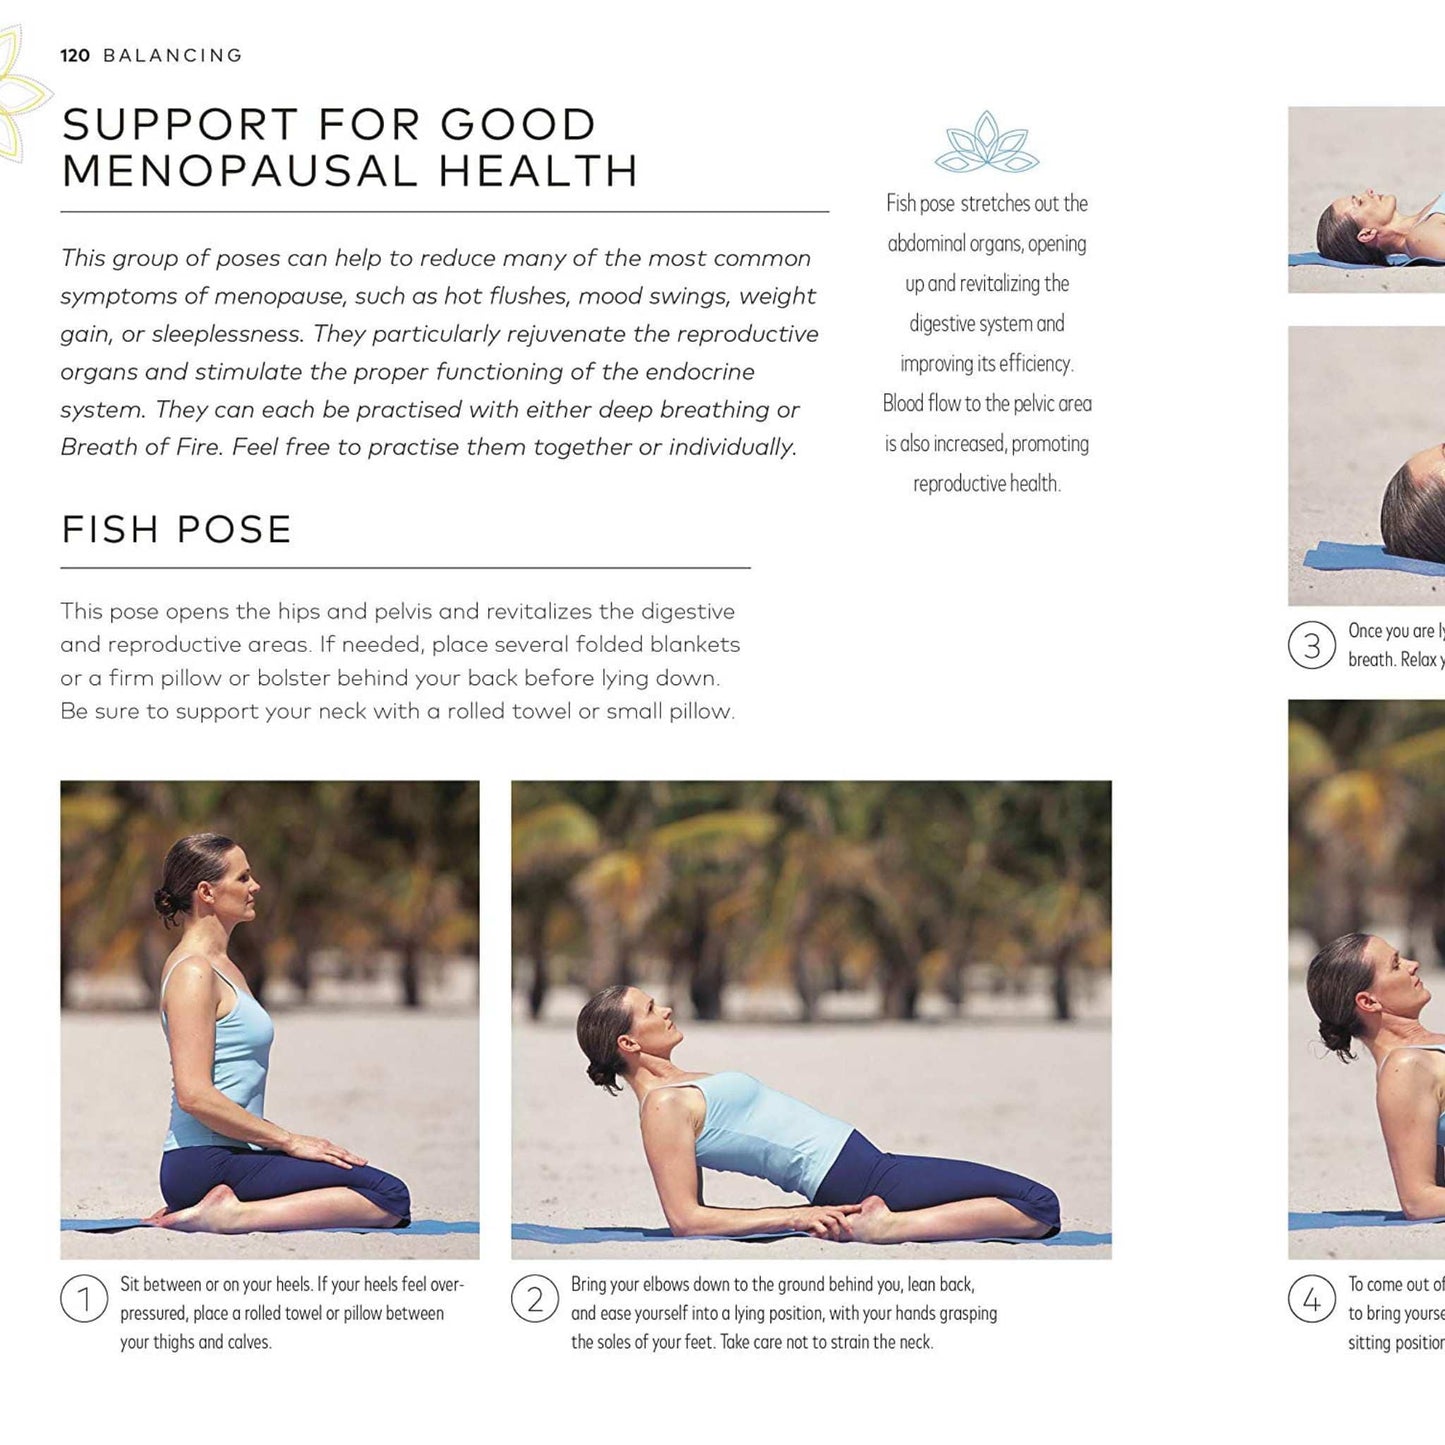 Our Bookshelf Print Books Yoga for Women - Wellness and Vitality at Every Stage of Life